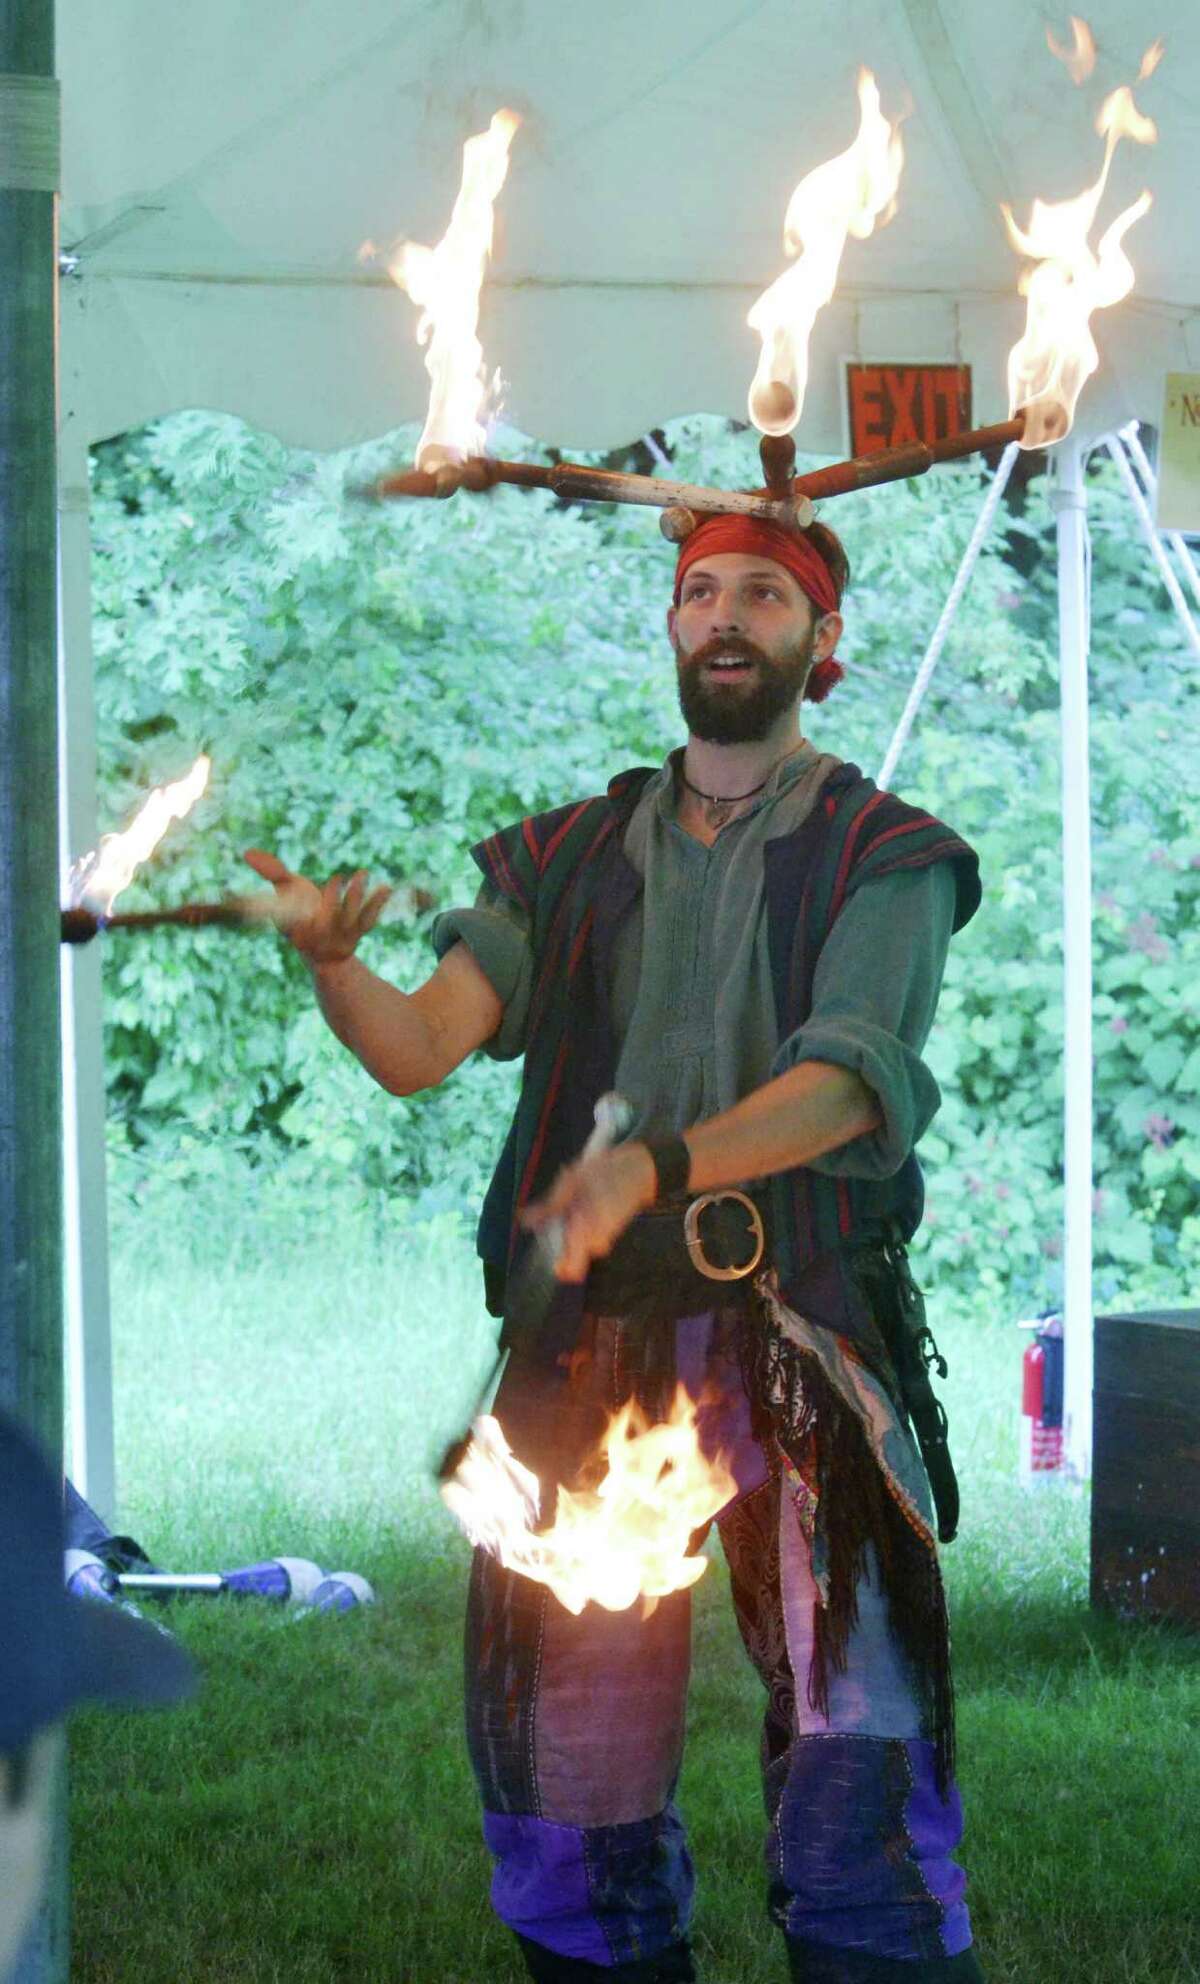 Chris Abbot, from South Plainville, N.J., balances torches on his head while simultaneously jugging fire at the Midsummer Fantasy Reinassance Faire at Warsaw Park in Ansonia, Conn. on June 28, 2015. The last weekend to visit the faire is July 4-5, 2015 from 11 a.m to 6:30 p.m.